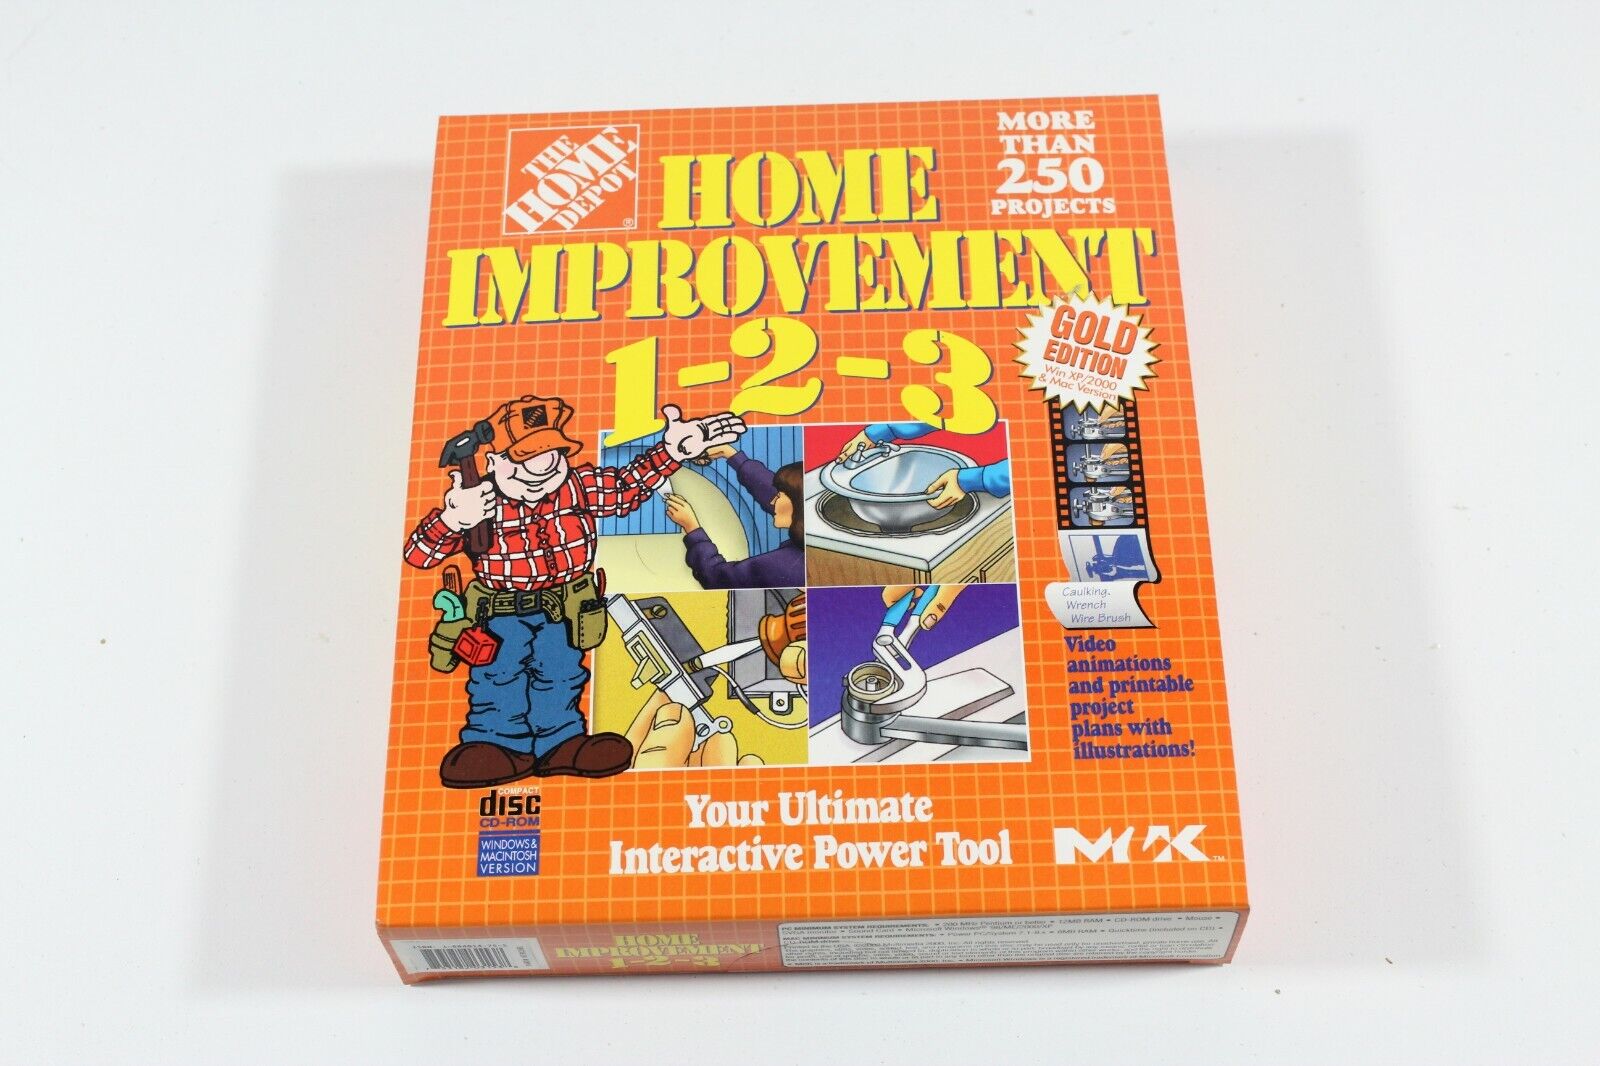 Home Depot: Home Improvement 1-2-3 Your Ultimate Interactive Power Tool Software